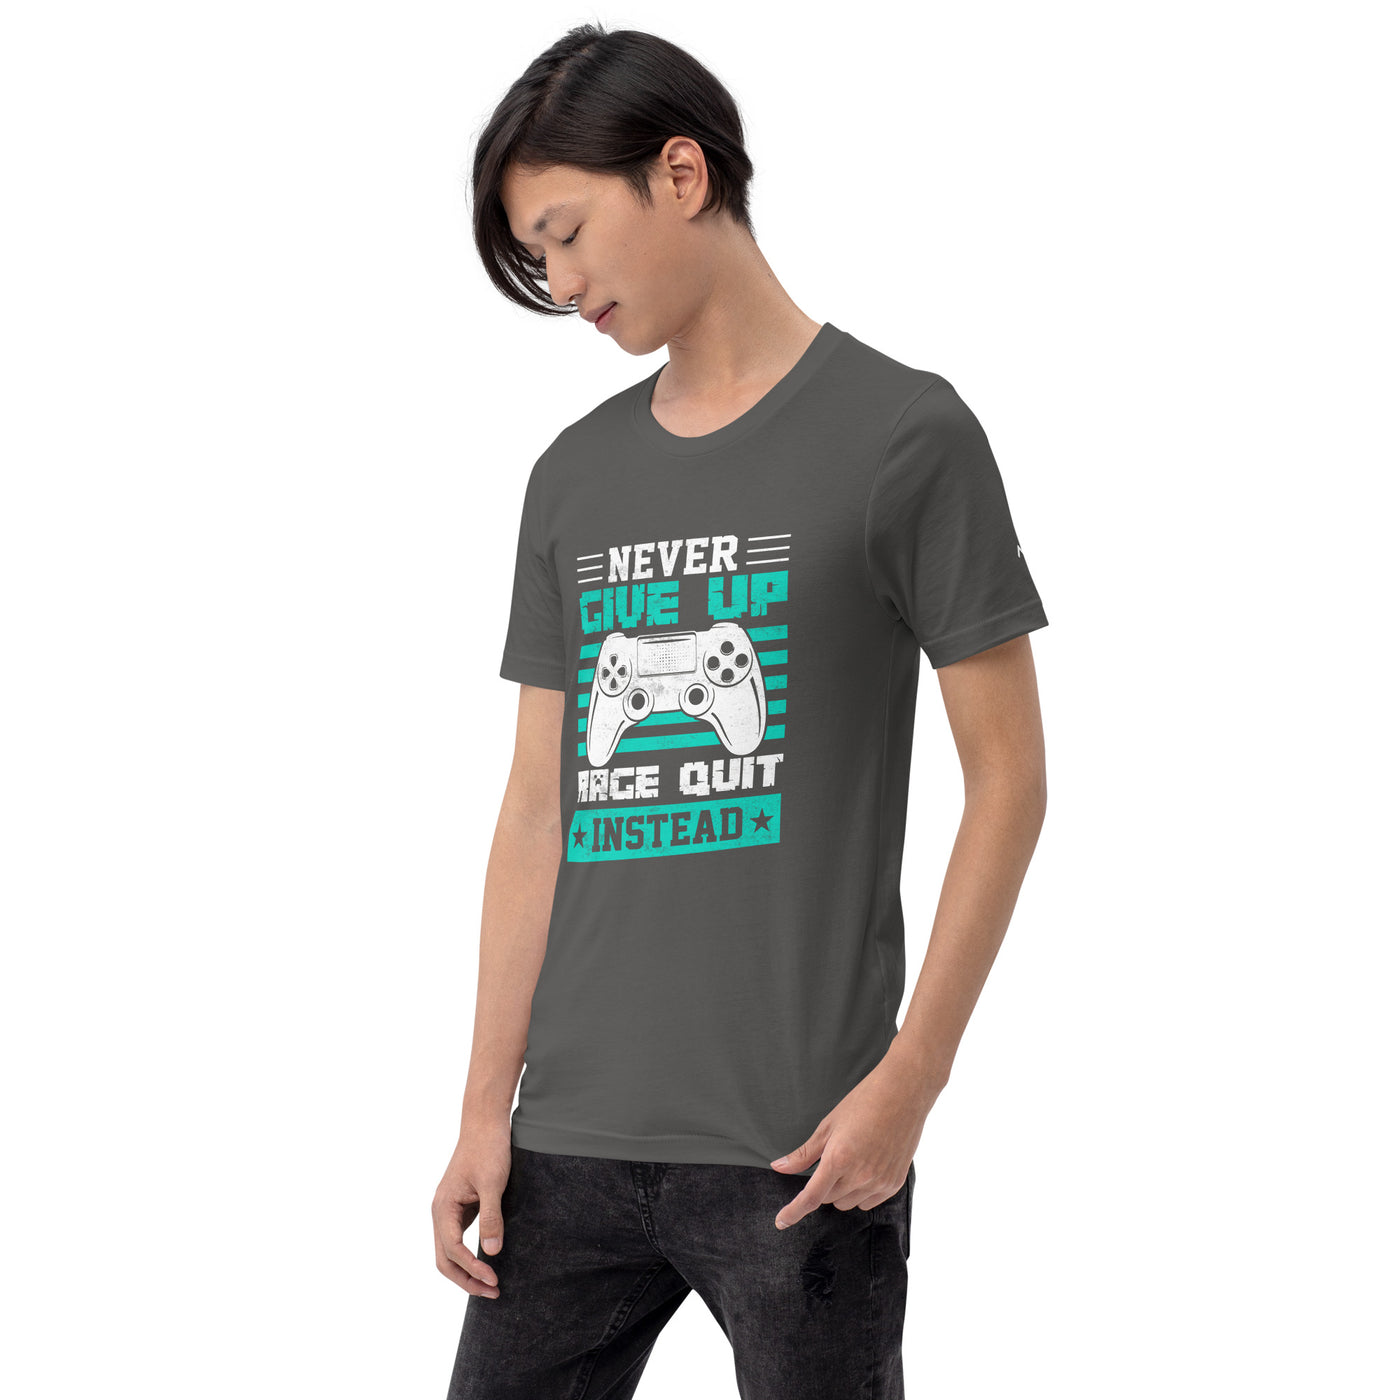 Never Give Up! Arge Quit - Unisex t-shirt